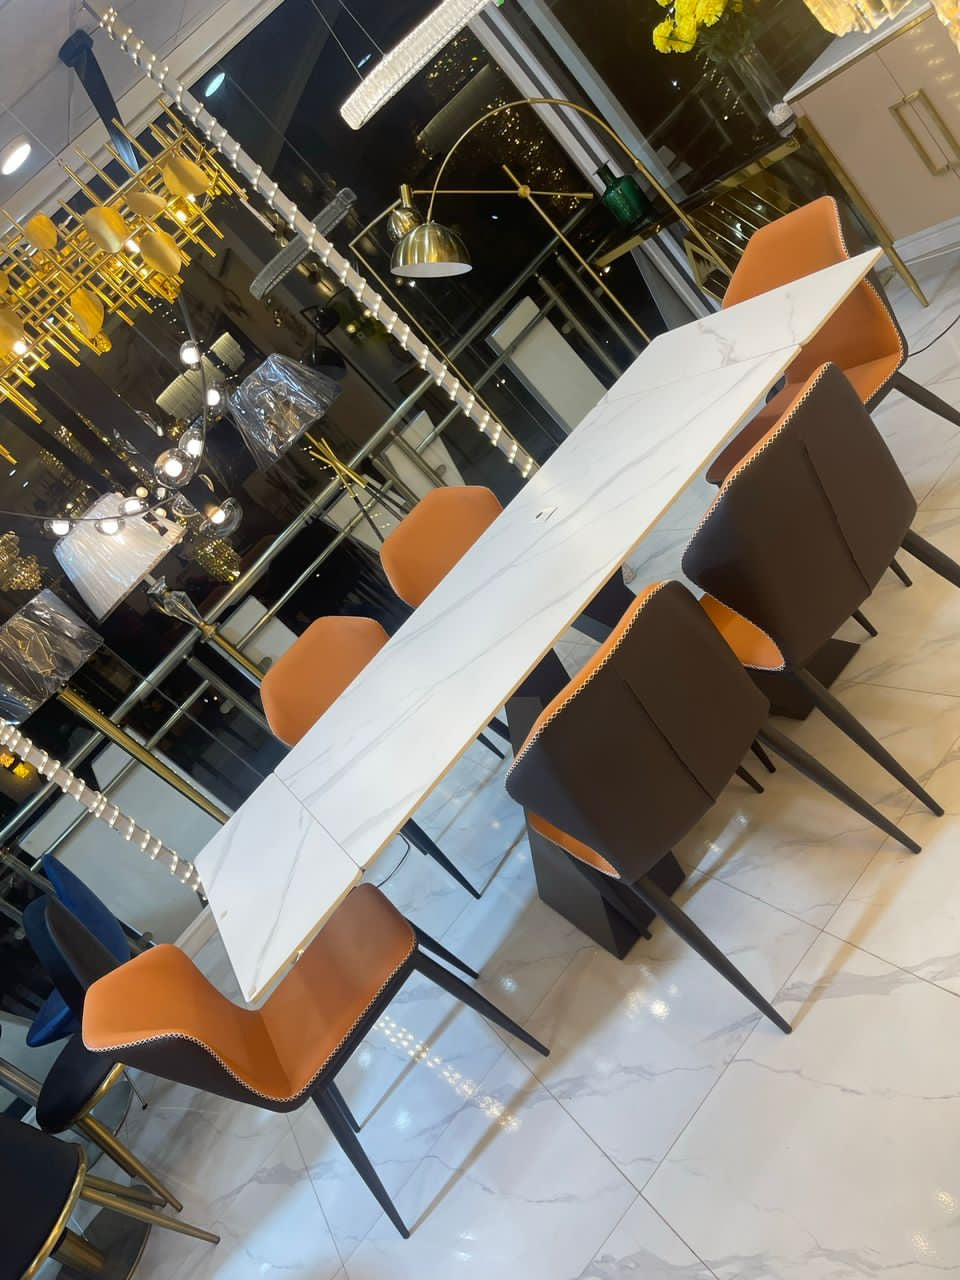 6 seater Extendable dining set